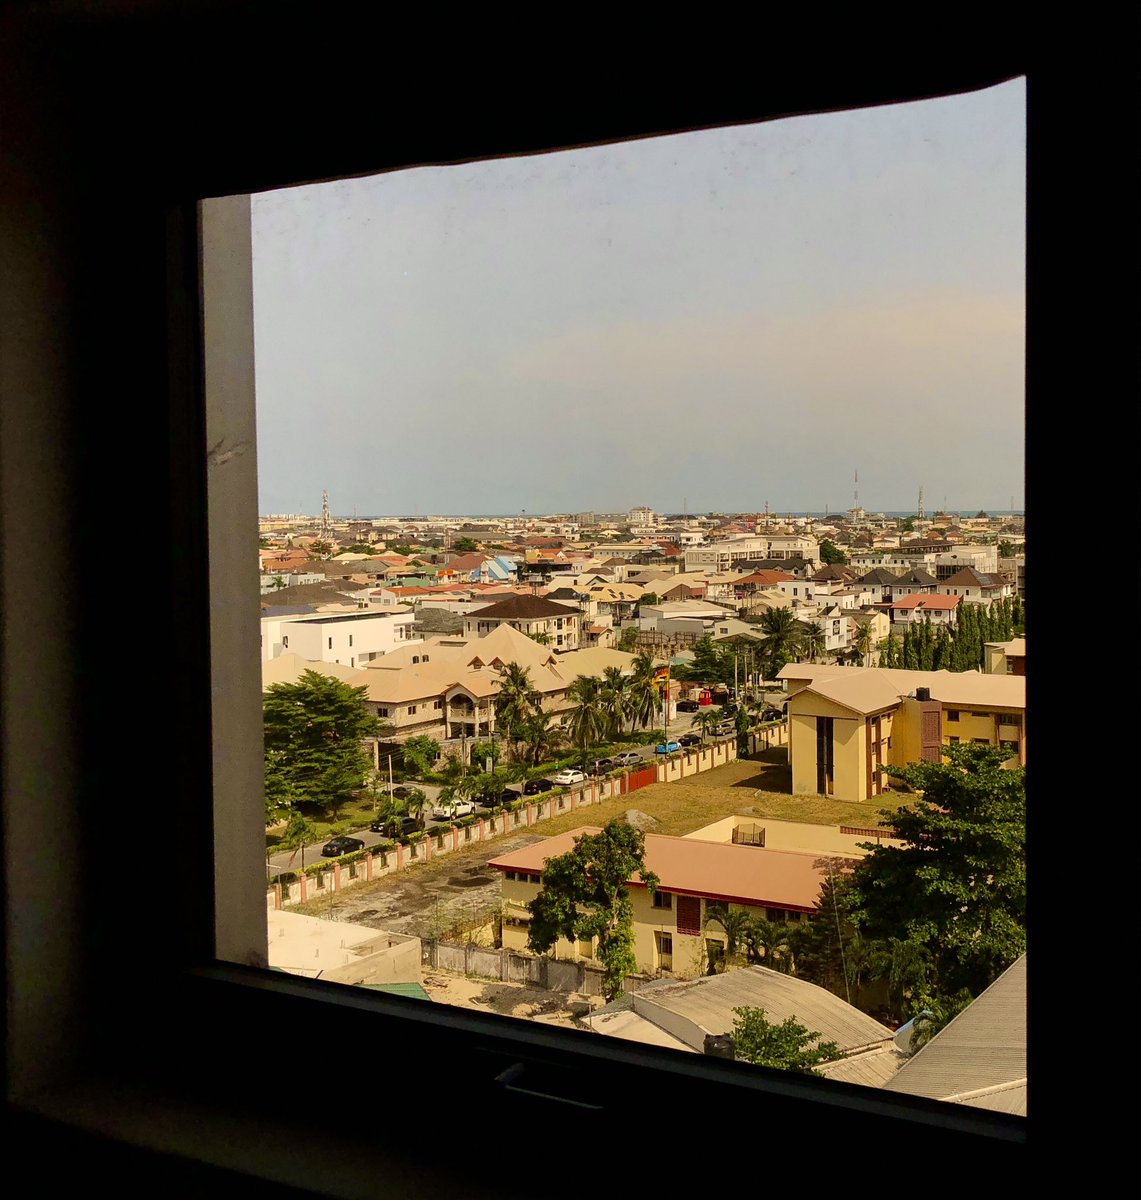 Overlooking Lagos, each house a story, each street a promise. 
From this vantage, the horizon teems with endless possibilities, beckoning dreams to soar. 
#Lagoslife #Citydreams #EndlessPossibilities